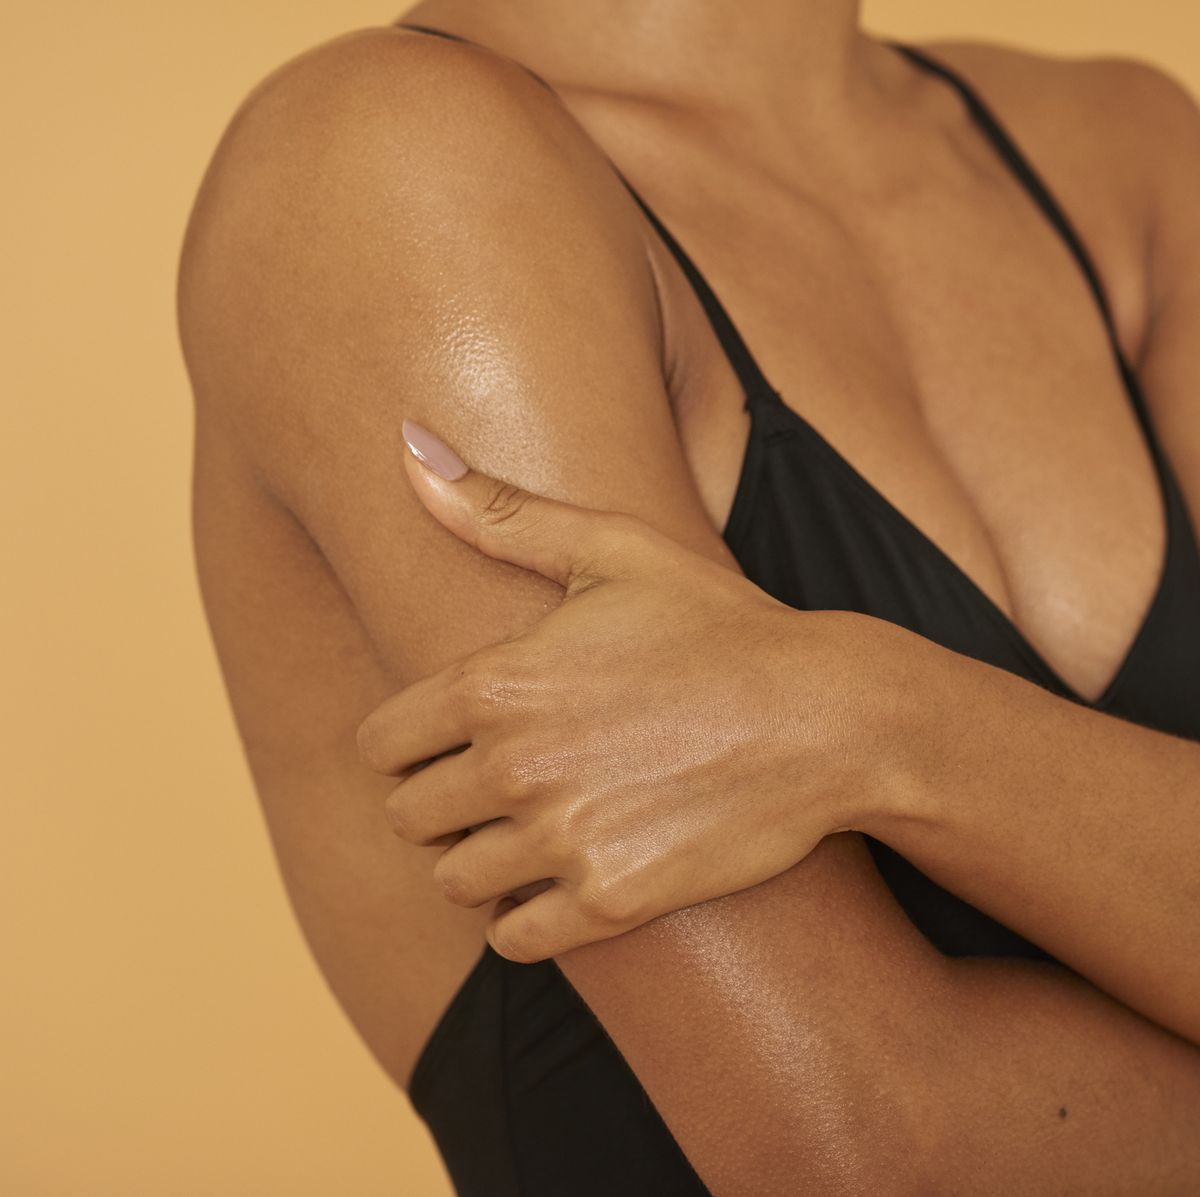 close up of woman's tanned body